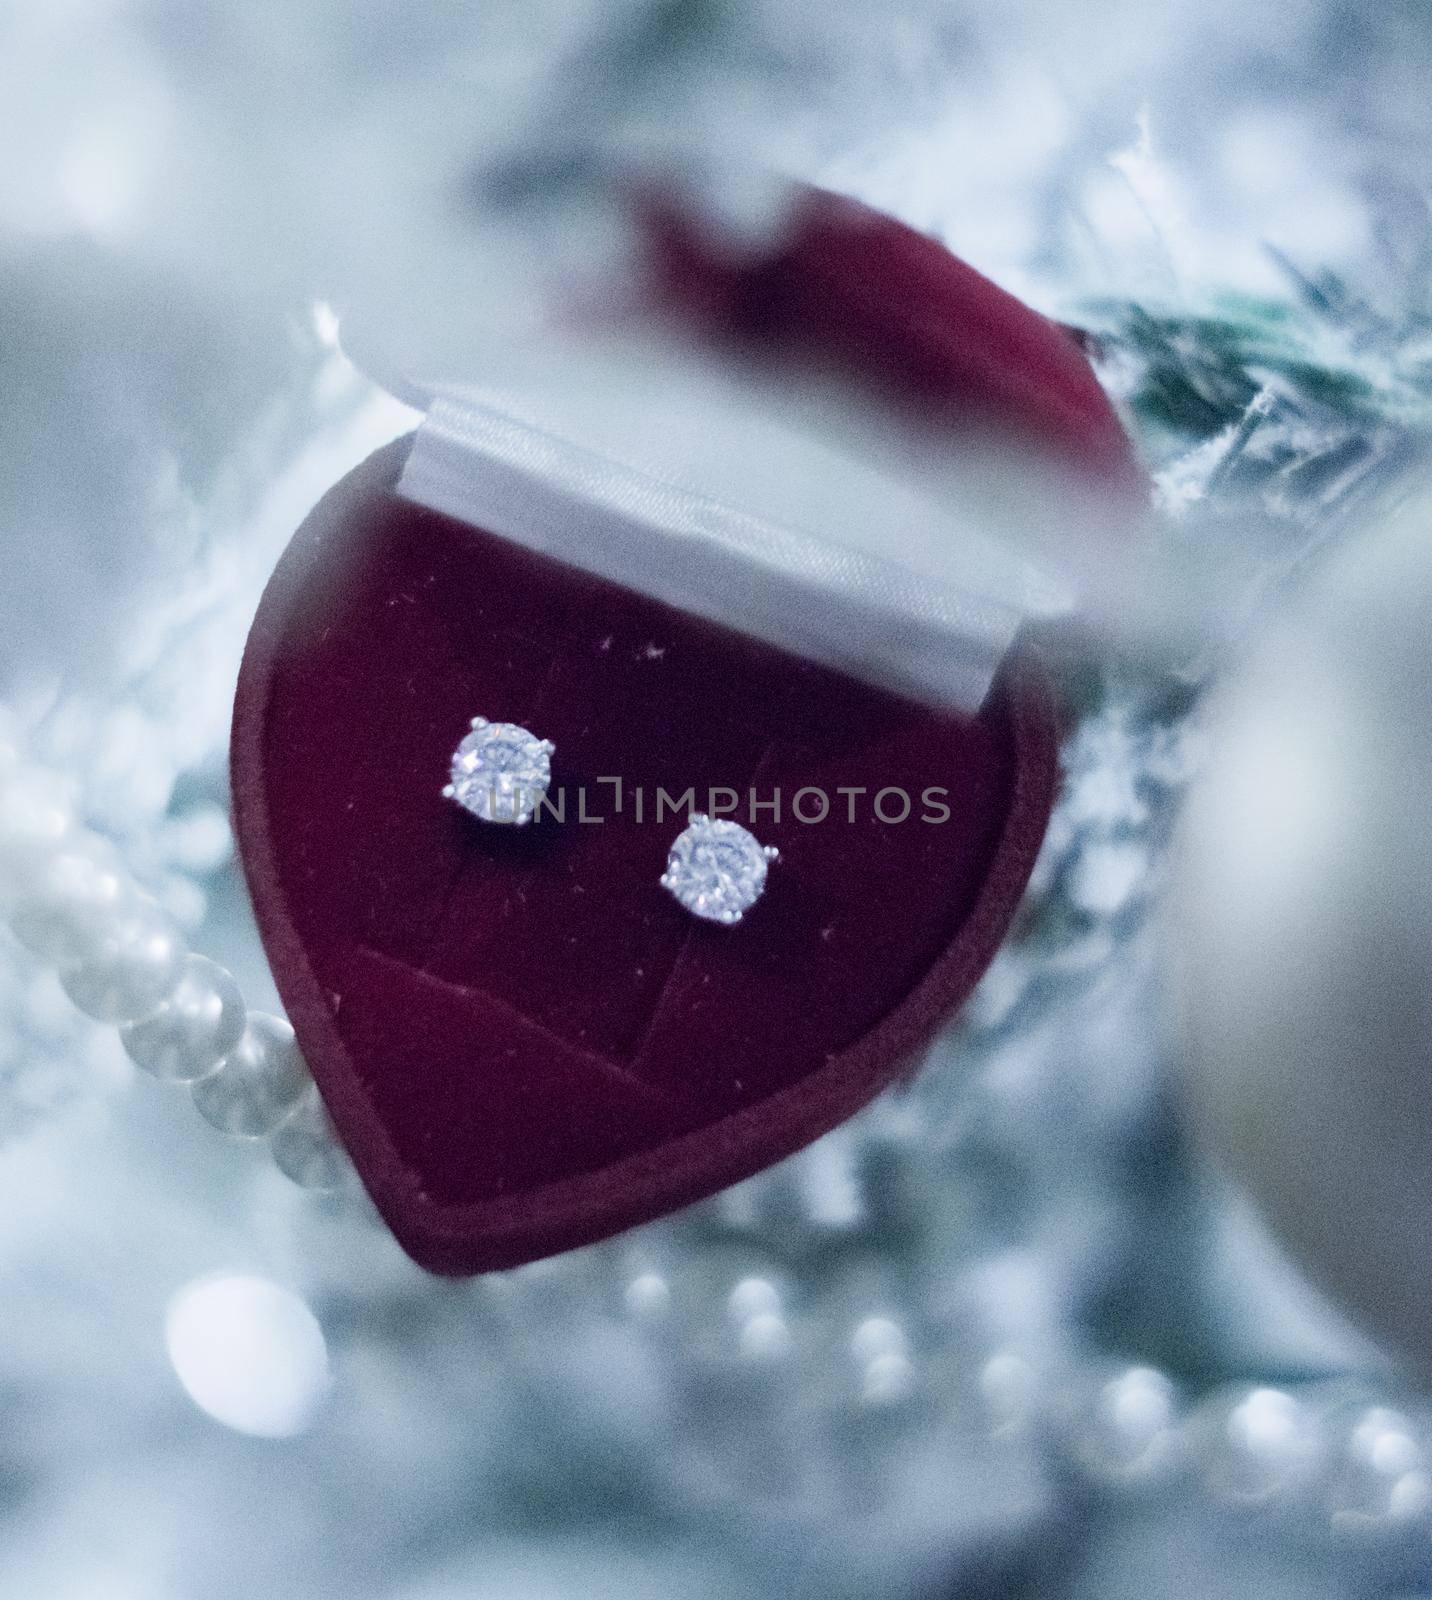 Elegant dimond jewellery, a perfect holiday gift for her on Christmas